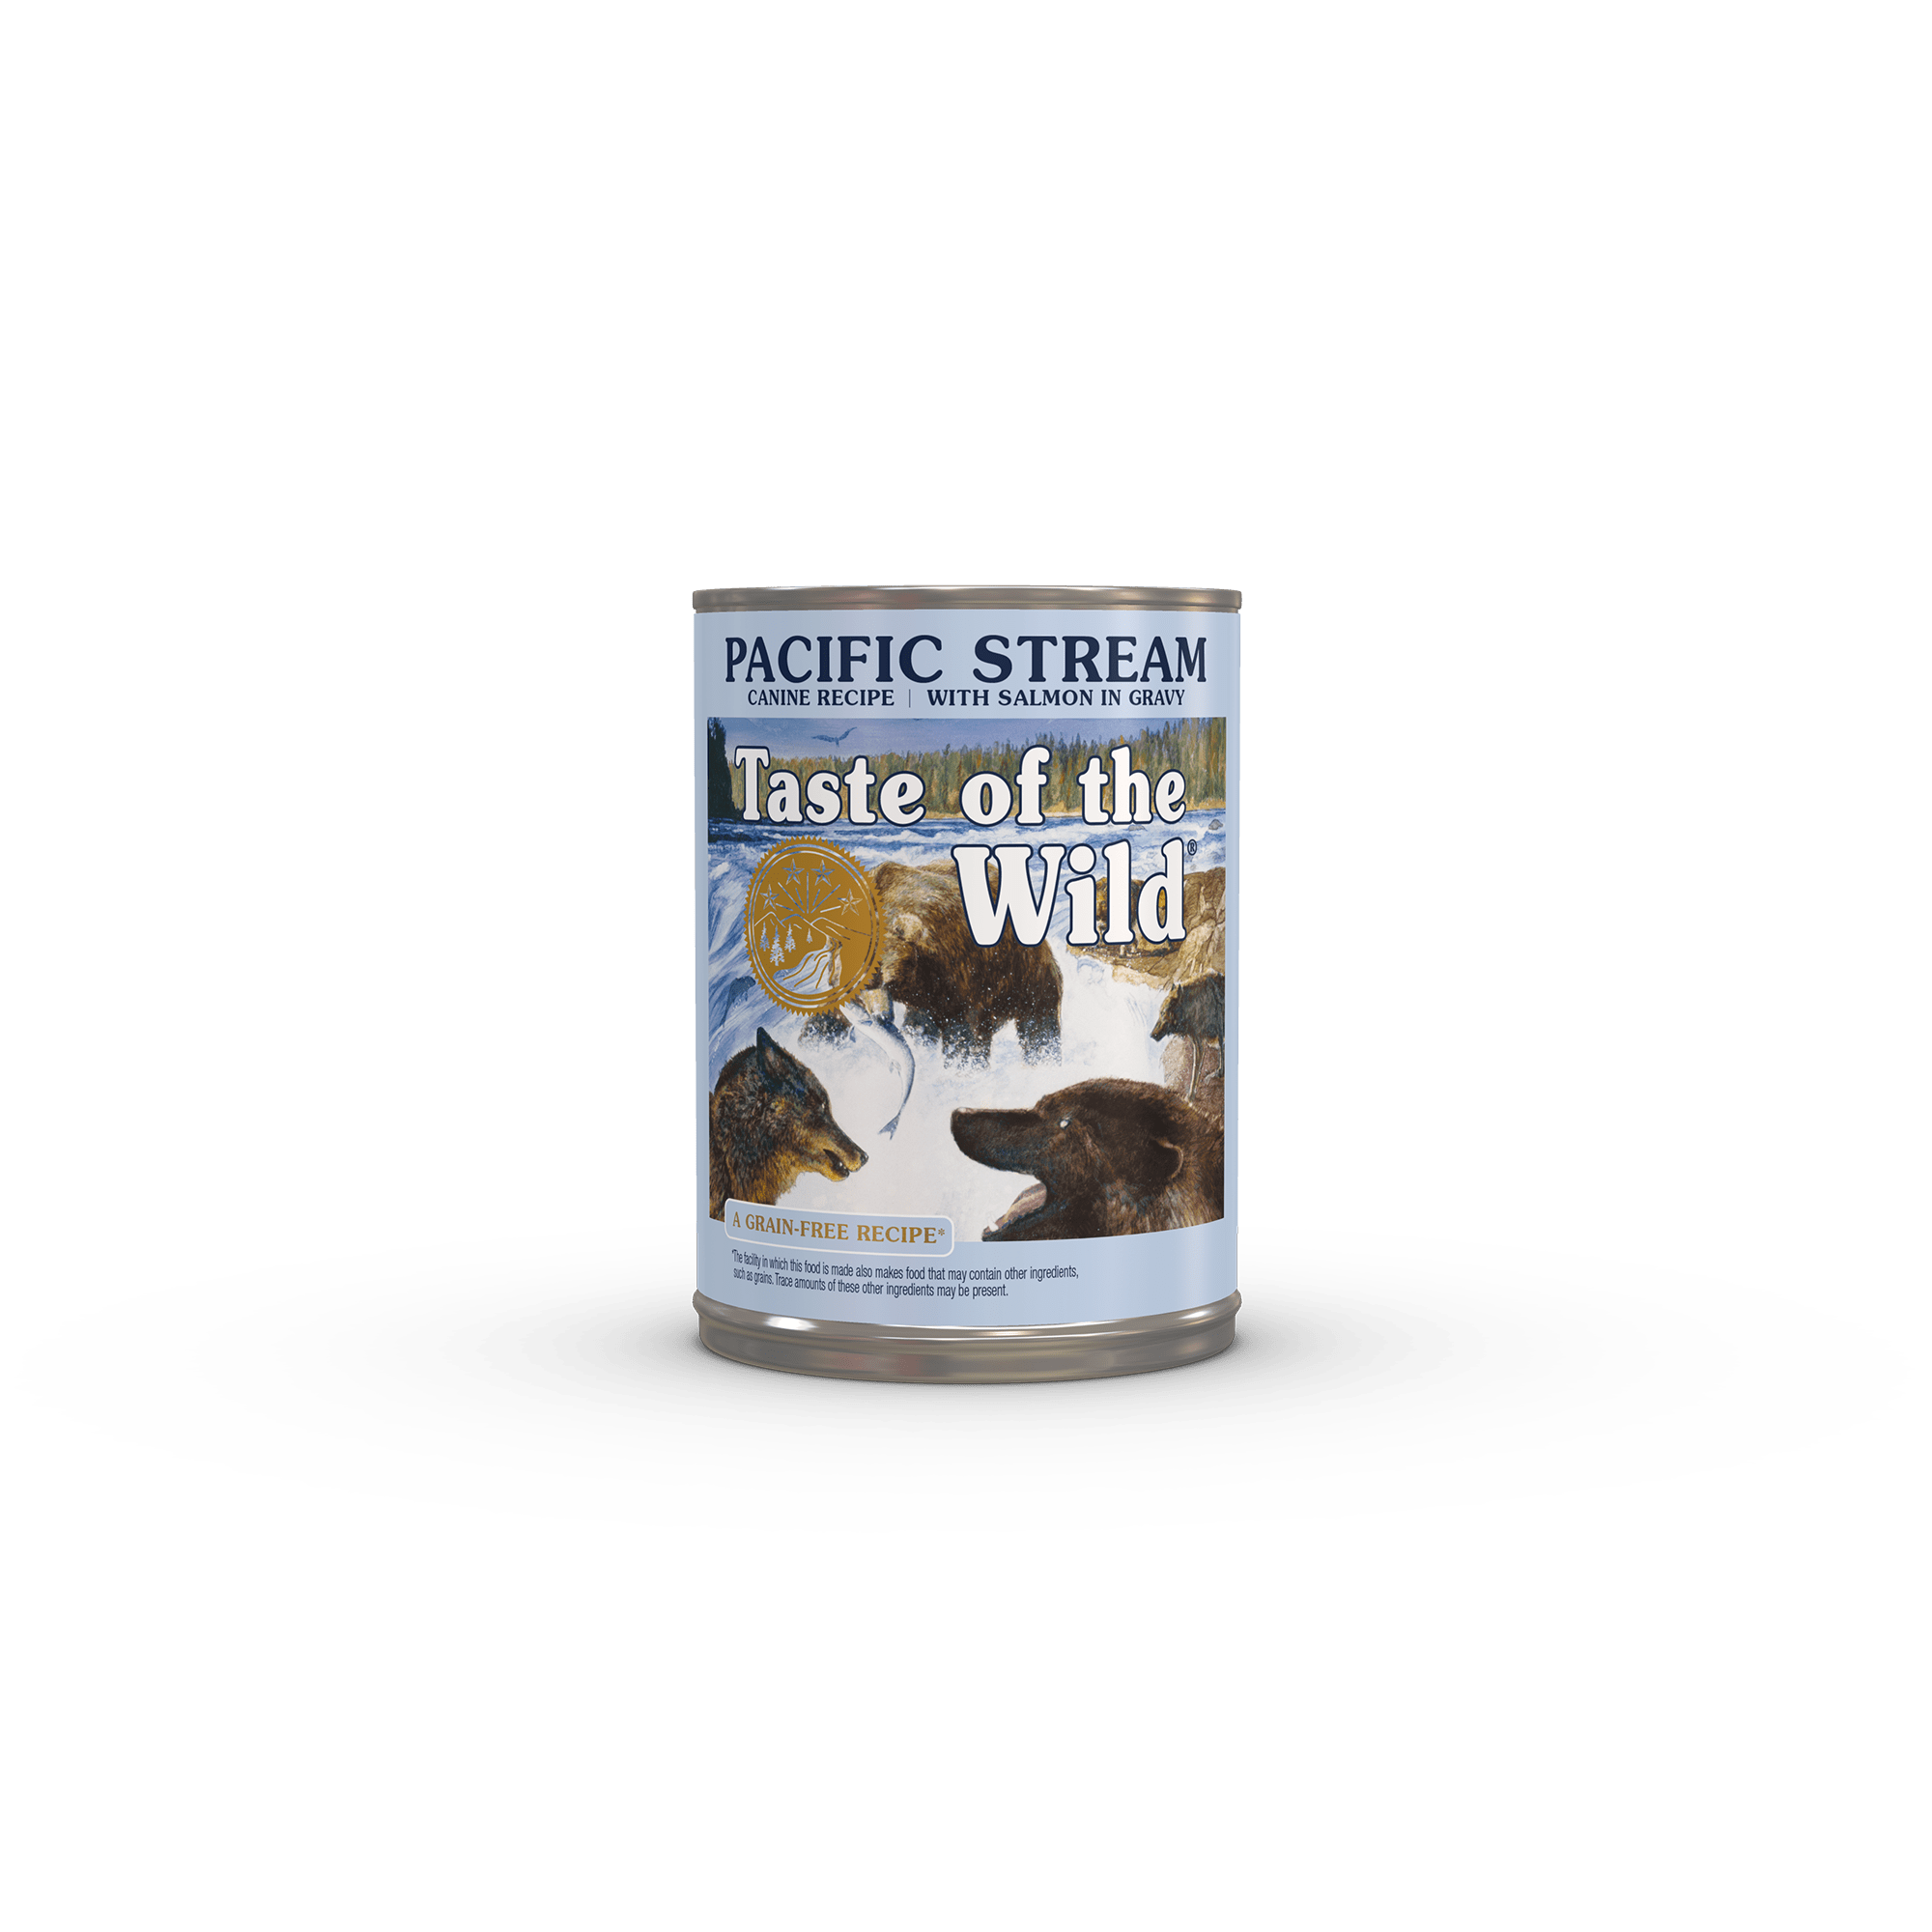 Taste of the Wild Grain-Free Canned Pacific Stream Canine Recipe with Salmon in Gravy package